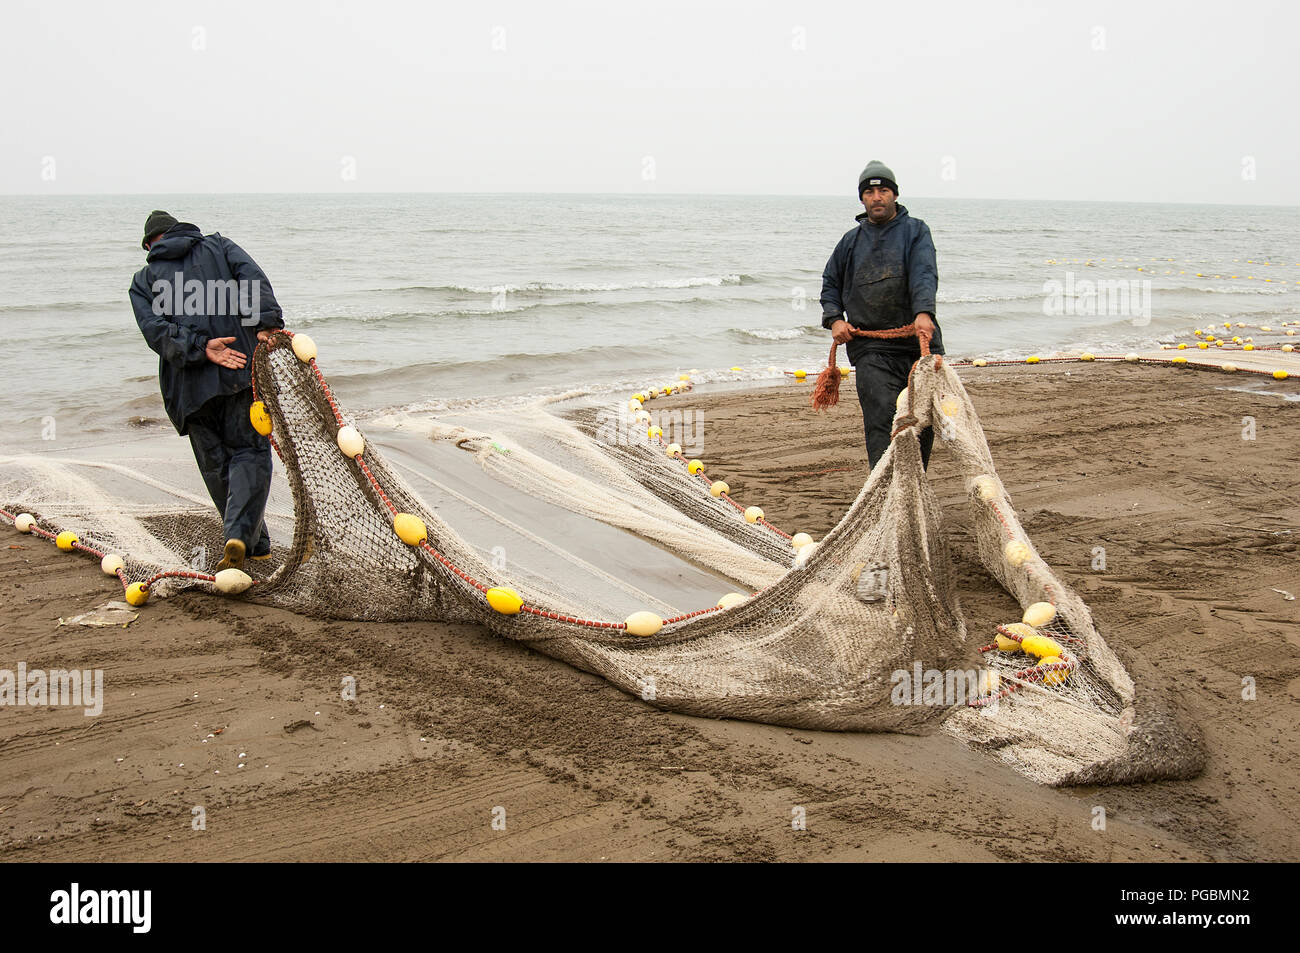 Fishermen pull the fishing net out of the sea in caspian sea Stock